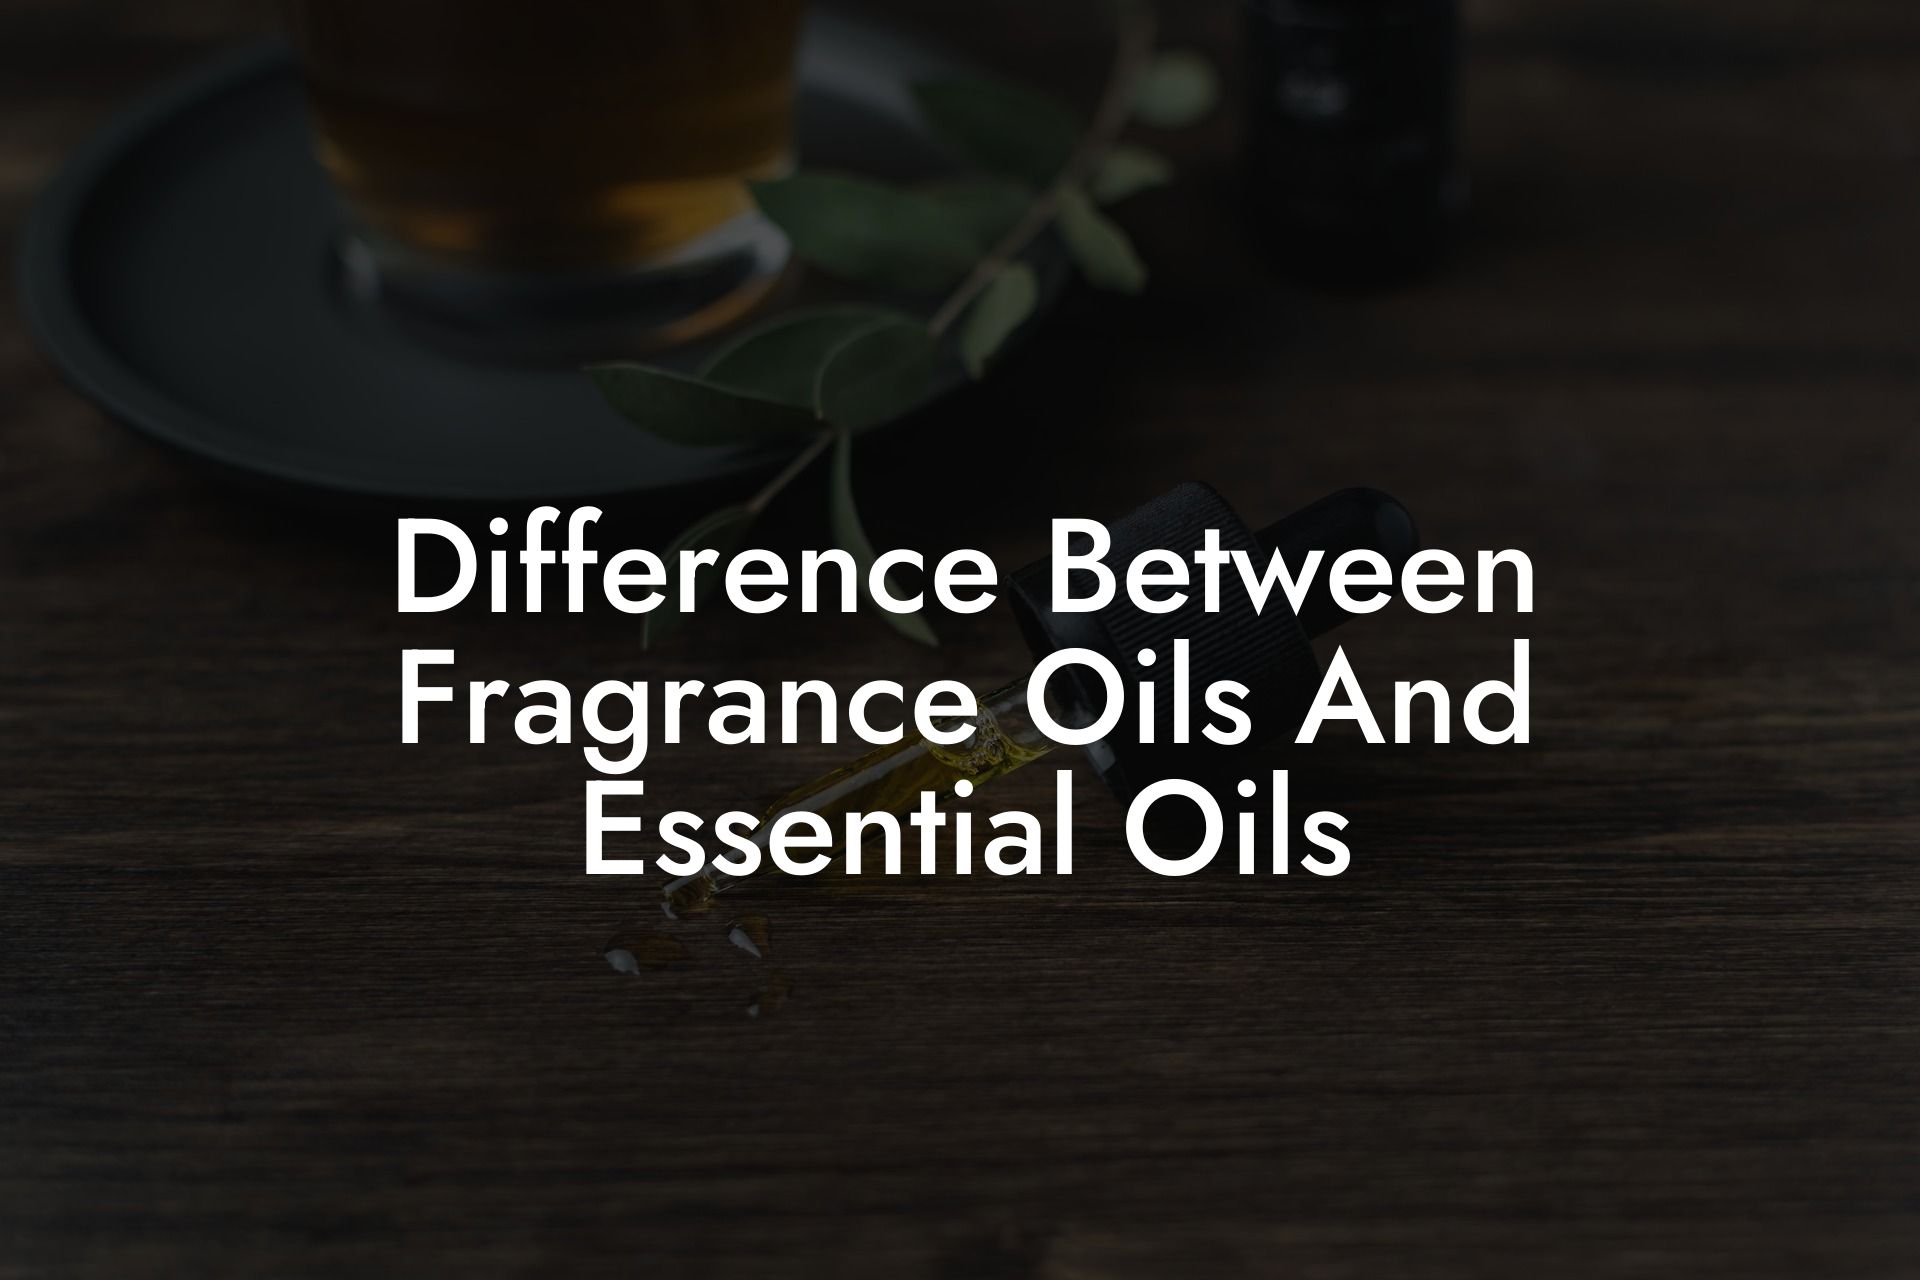 Difference Between Fragrance Oils And Essential Oils